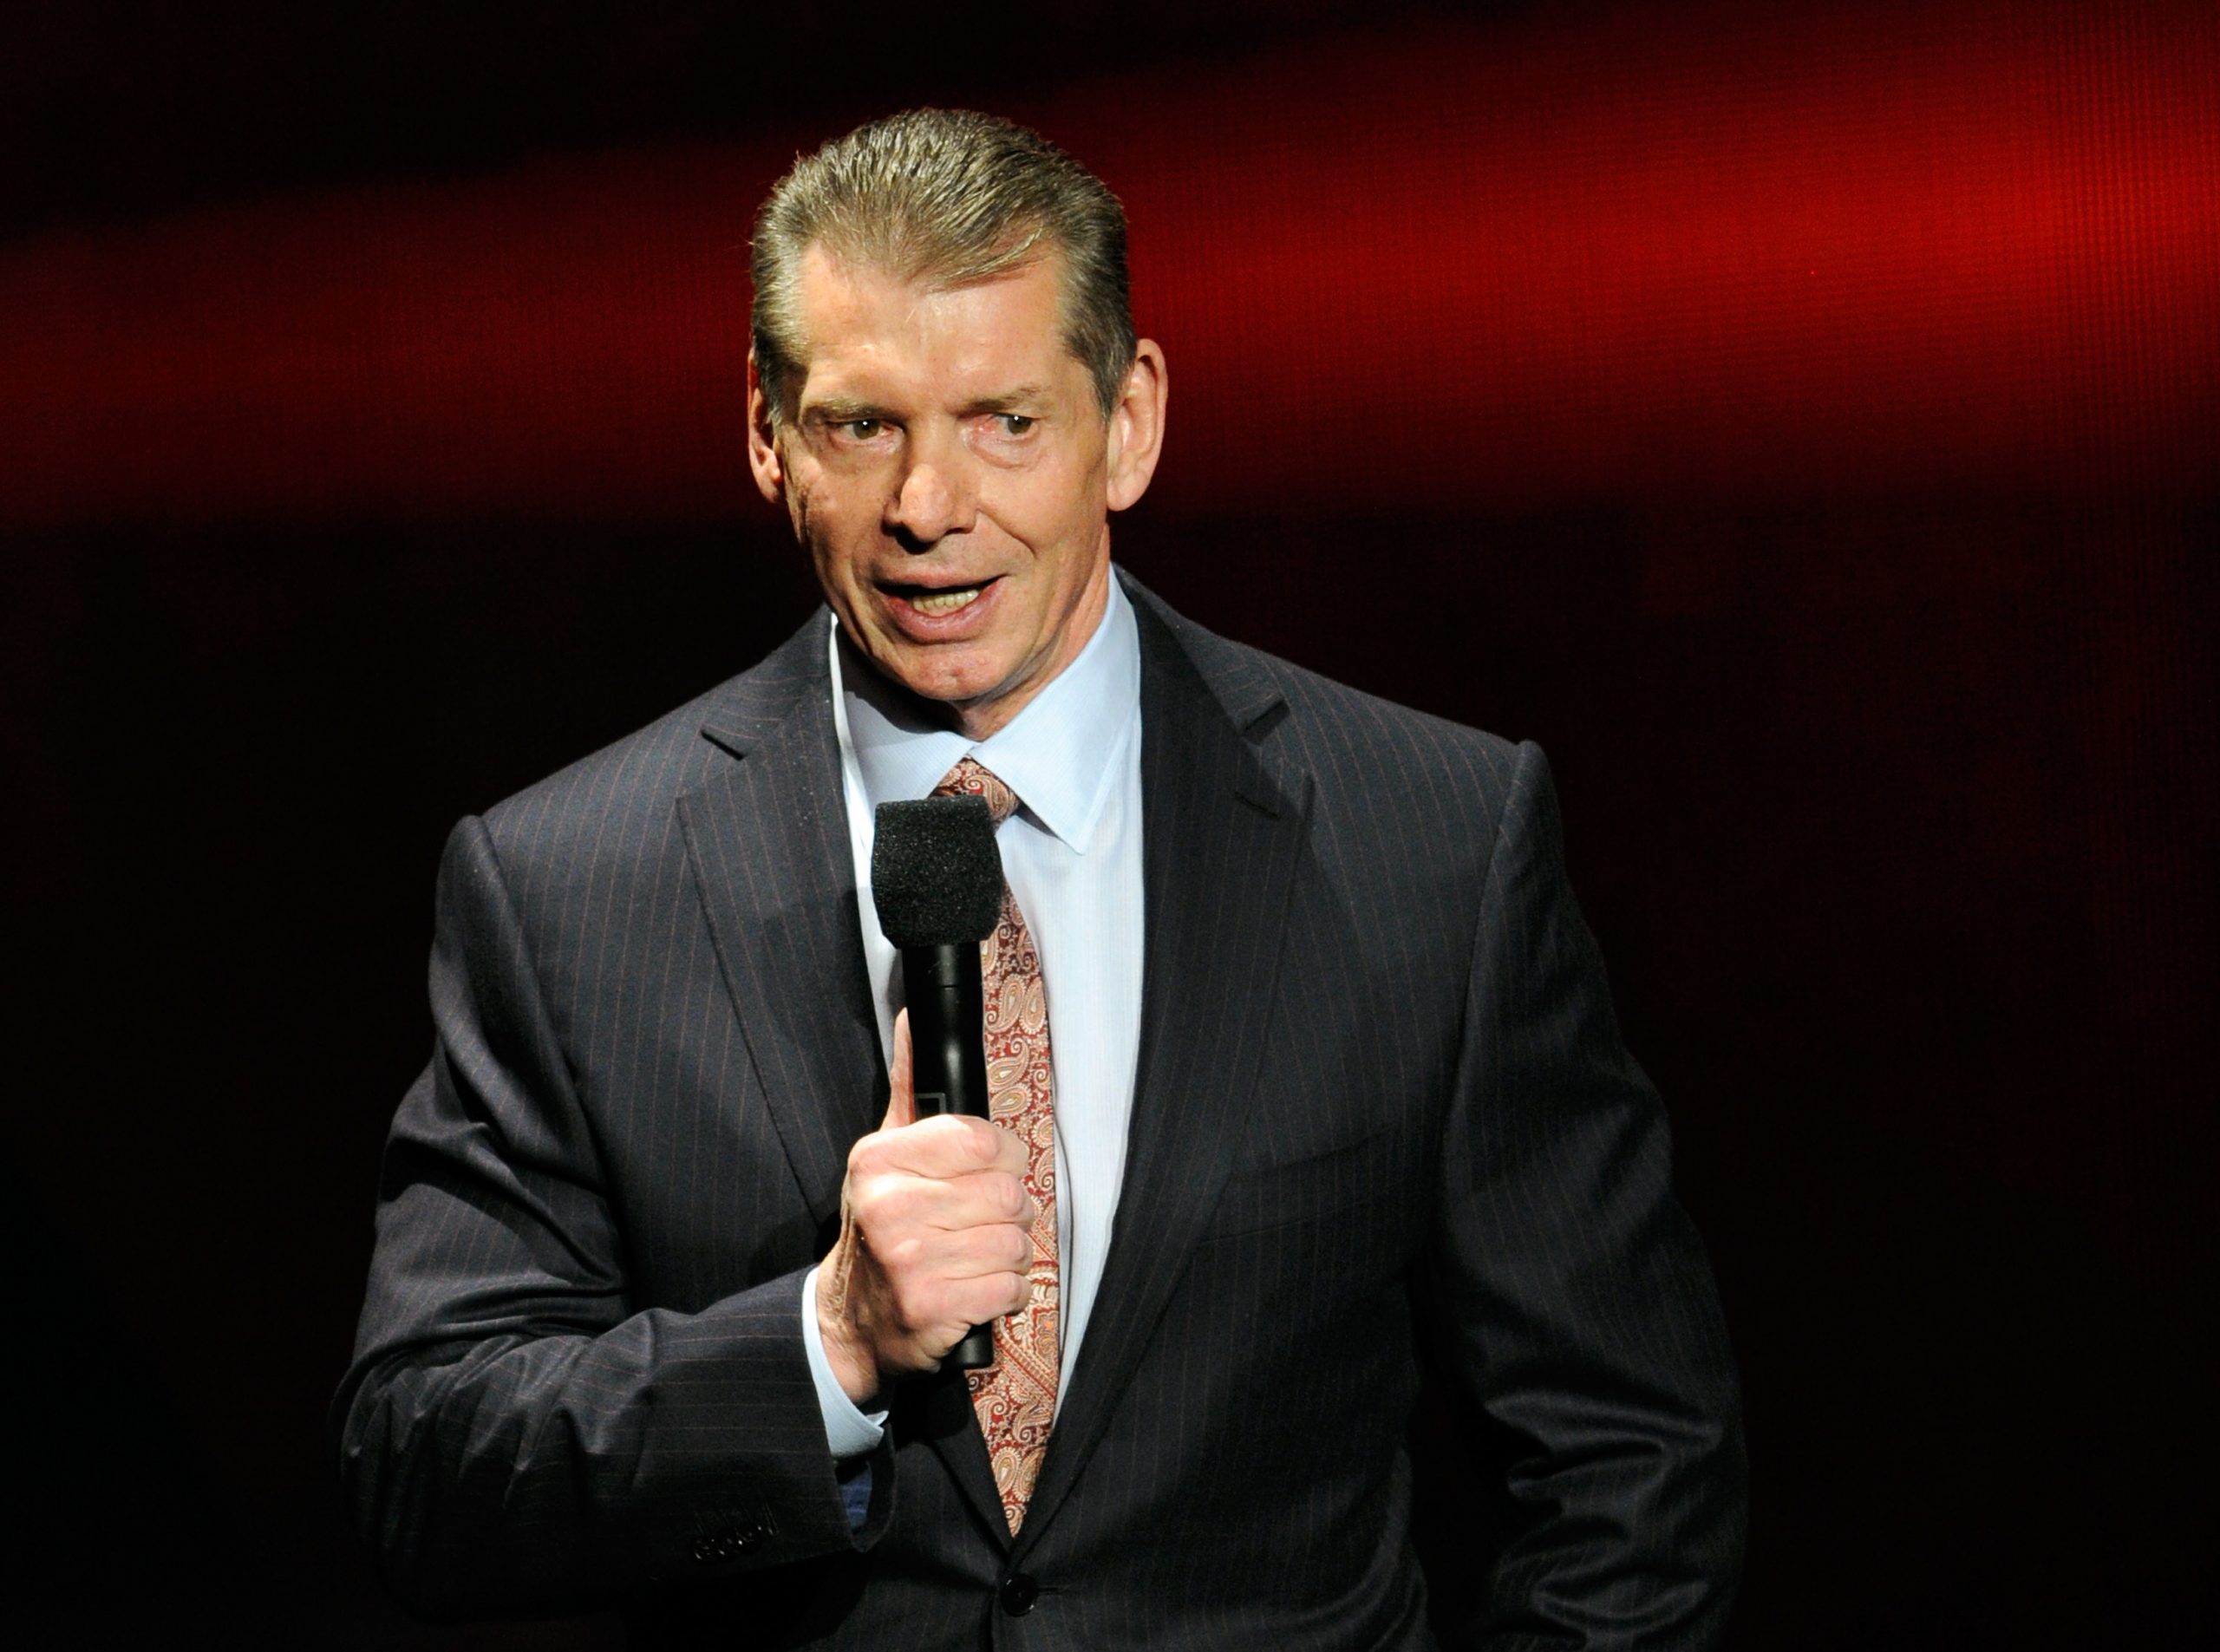 Vince McMahon, husband of a former Trump official, steps down amid WWE misconduct probe